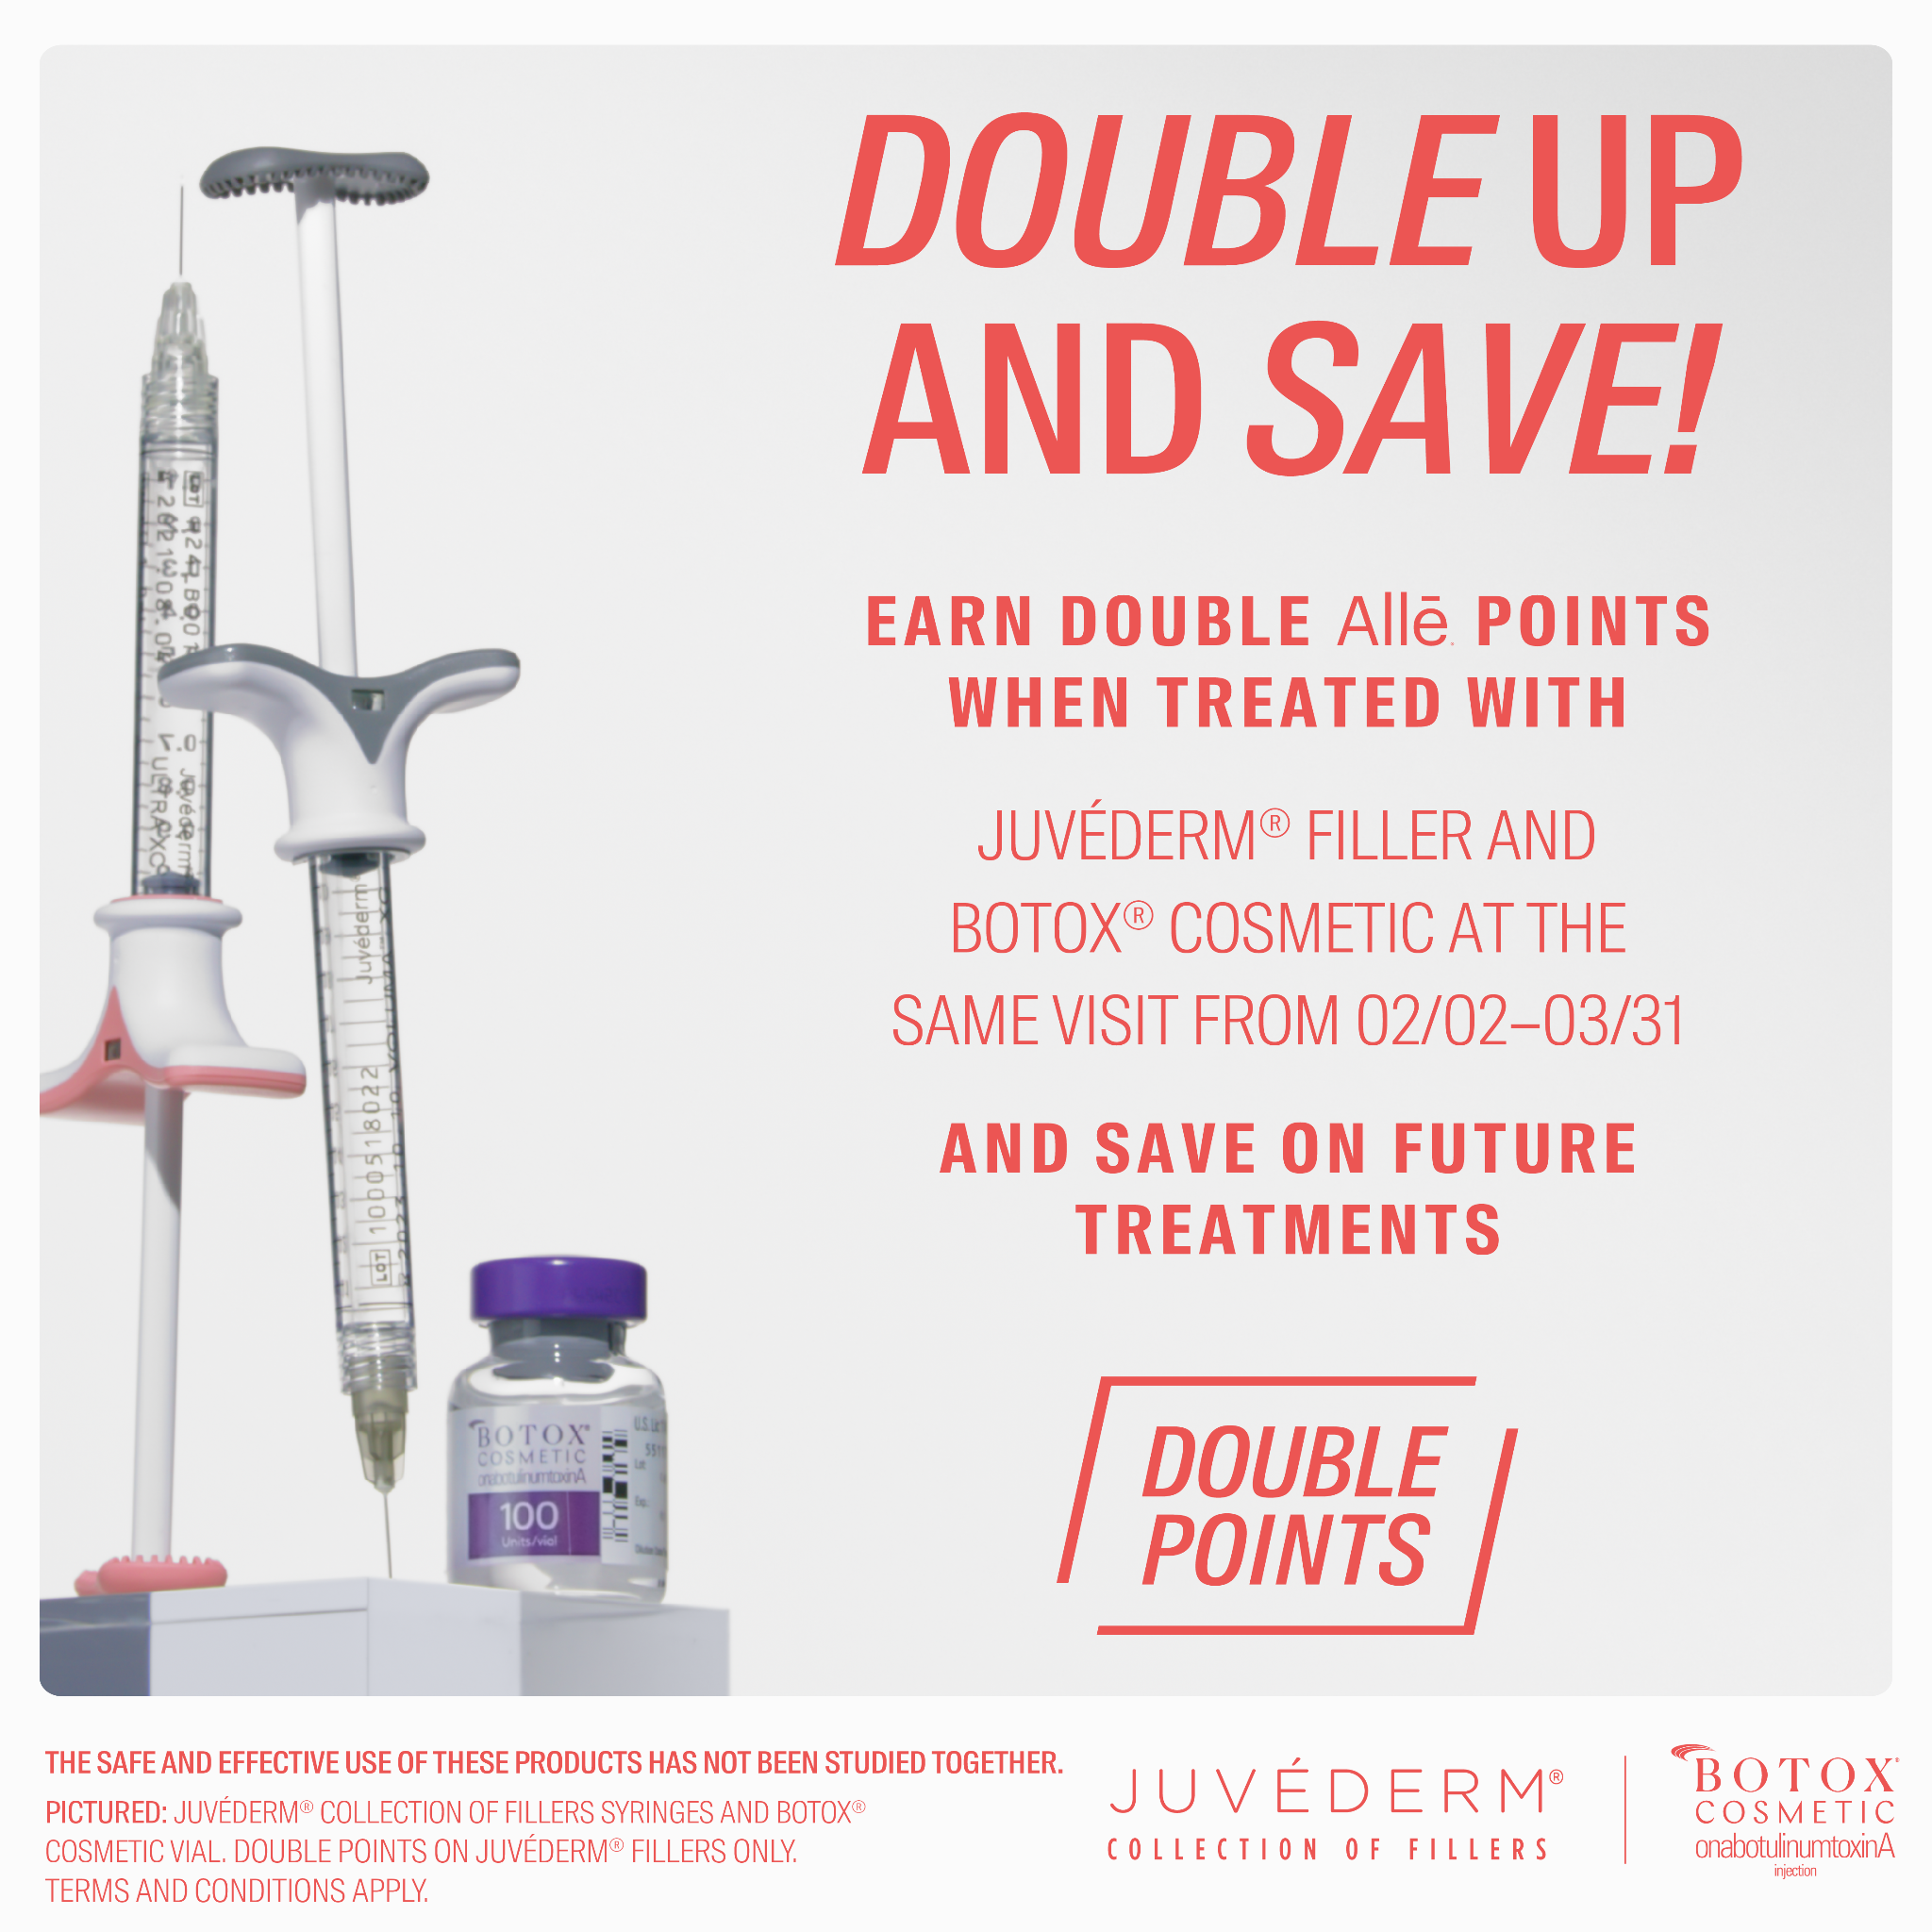 DOUBLE UP AND SAVE! EARN DOUBLE Alle POINTS WHEN TREATED WITH JUVÉDERM® FILLER AND BOTOX® COSMETIC AT THE SAME VISIT FROM 02/02-03/31 AND SAVE ON FUTURE TREATMENTS